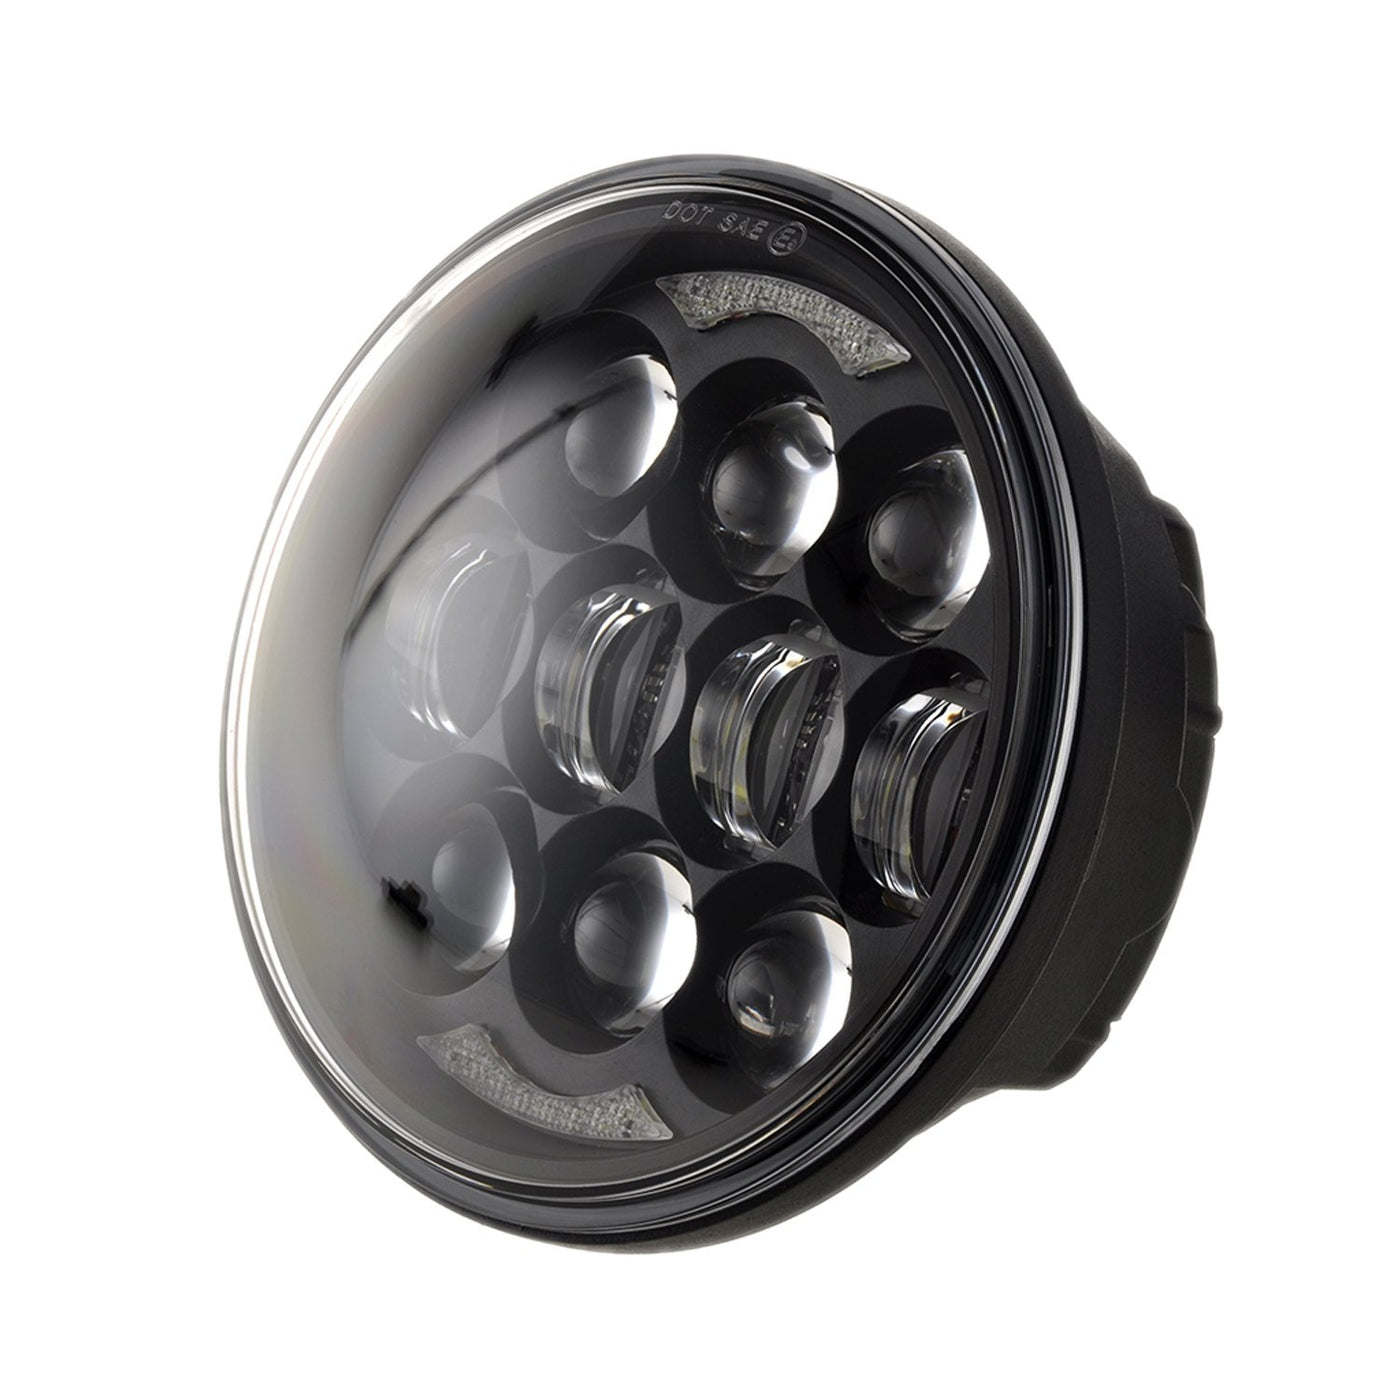 5-3/4" 80 LED Conversion Bulb for Harley Motorcycles – TC